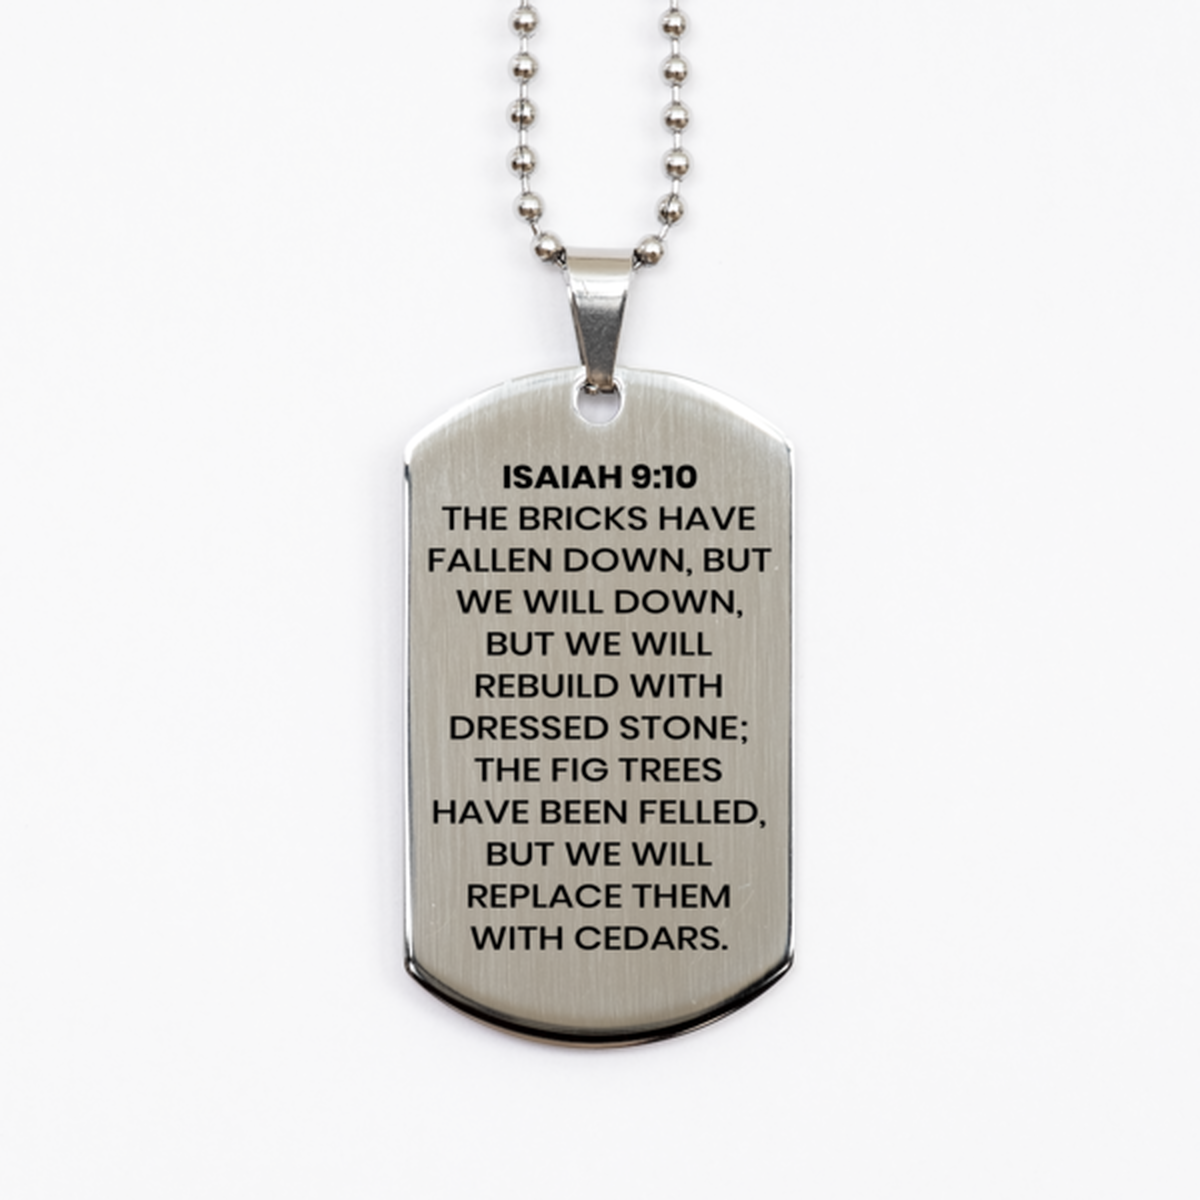 Isaiah 9:10 Necklace, Bible Verse Necklace, Christian Necklace, Christian Birthday Gift, Stainless Steel Dog Tag Necklace, Gift for Christian.